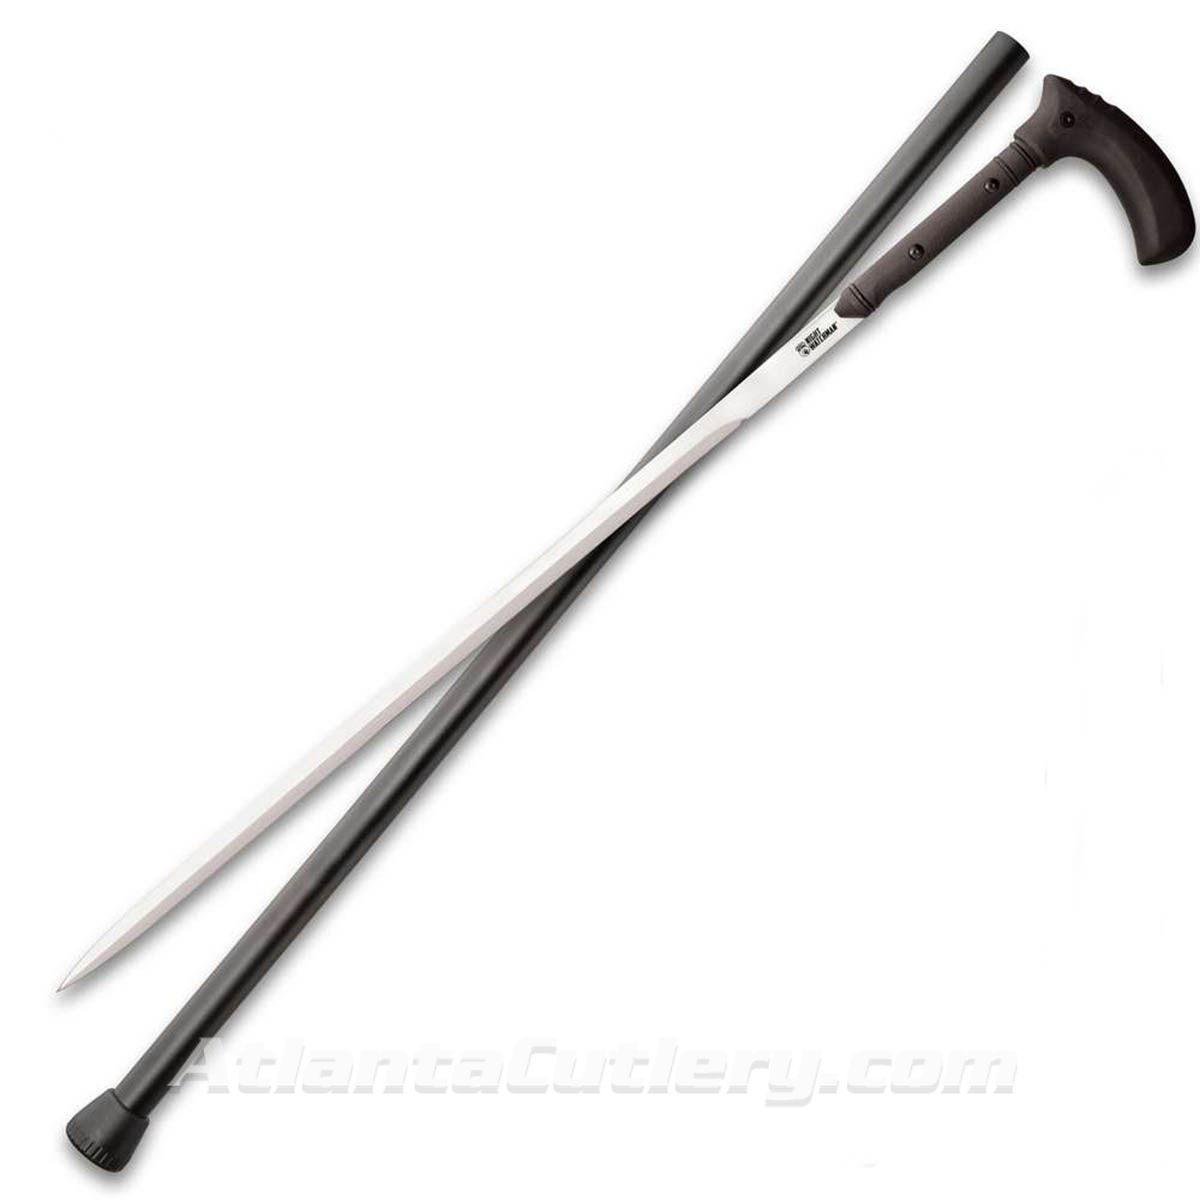 Night Watchman Heavy Duty Sword Cane houses a 25" high carbon steel blade 